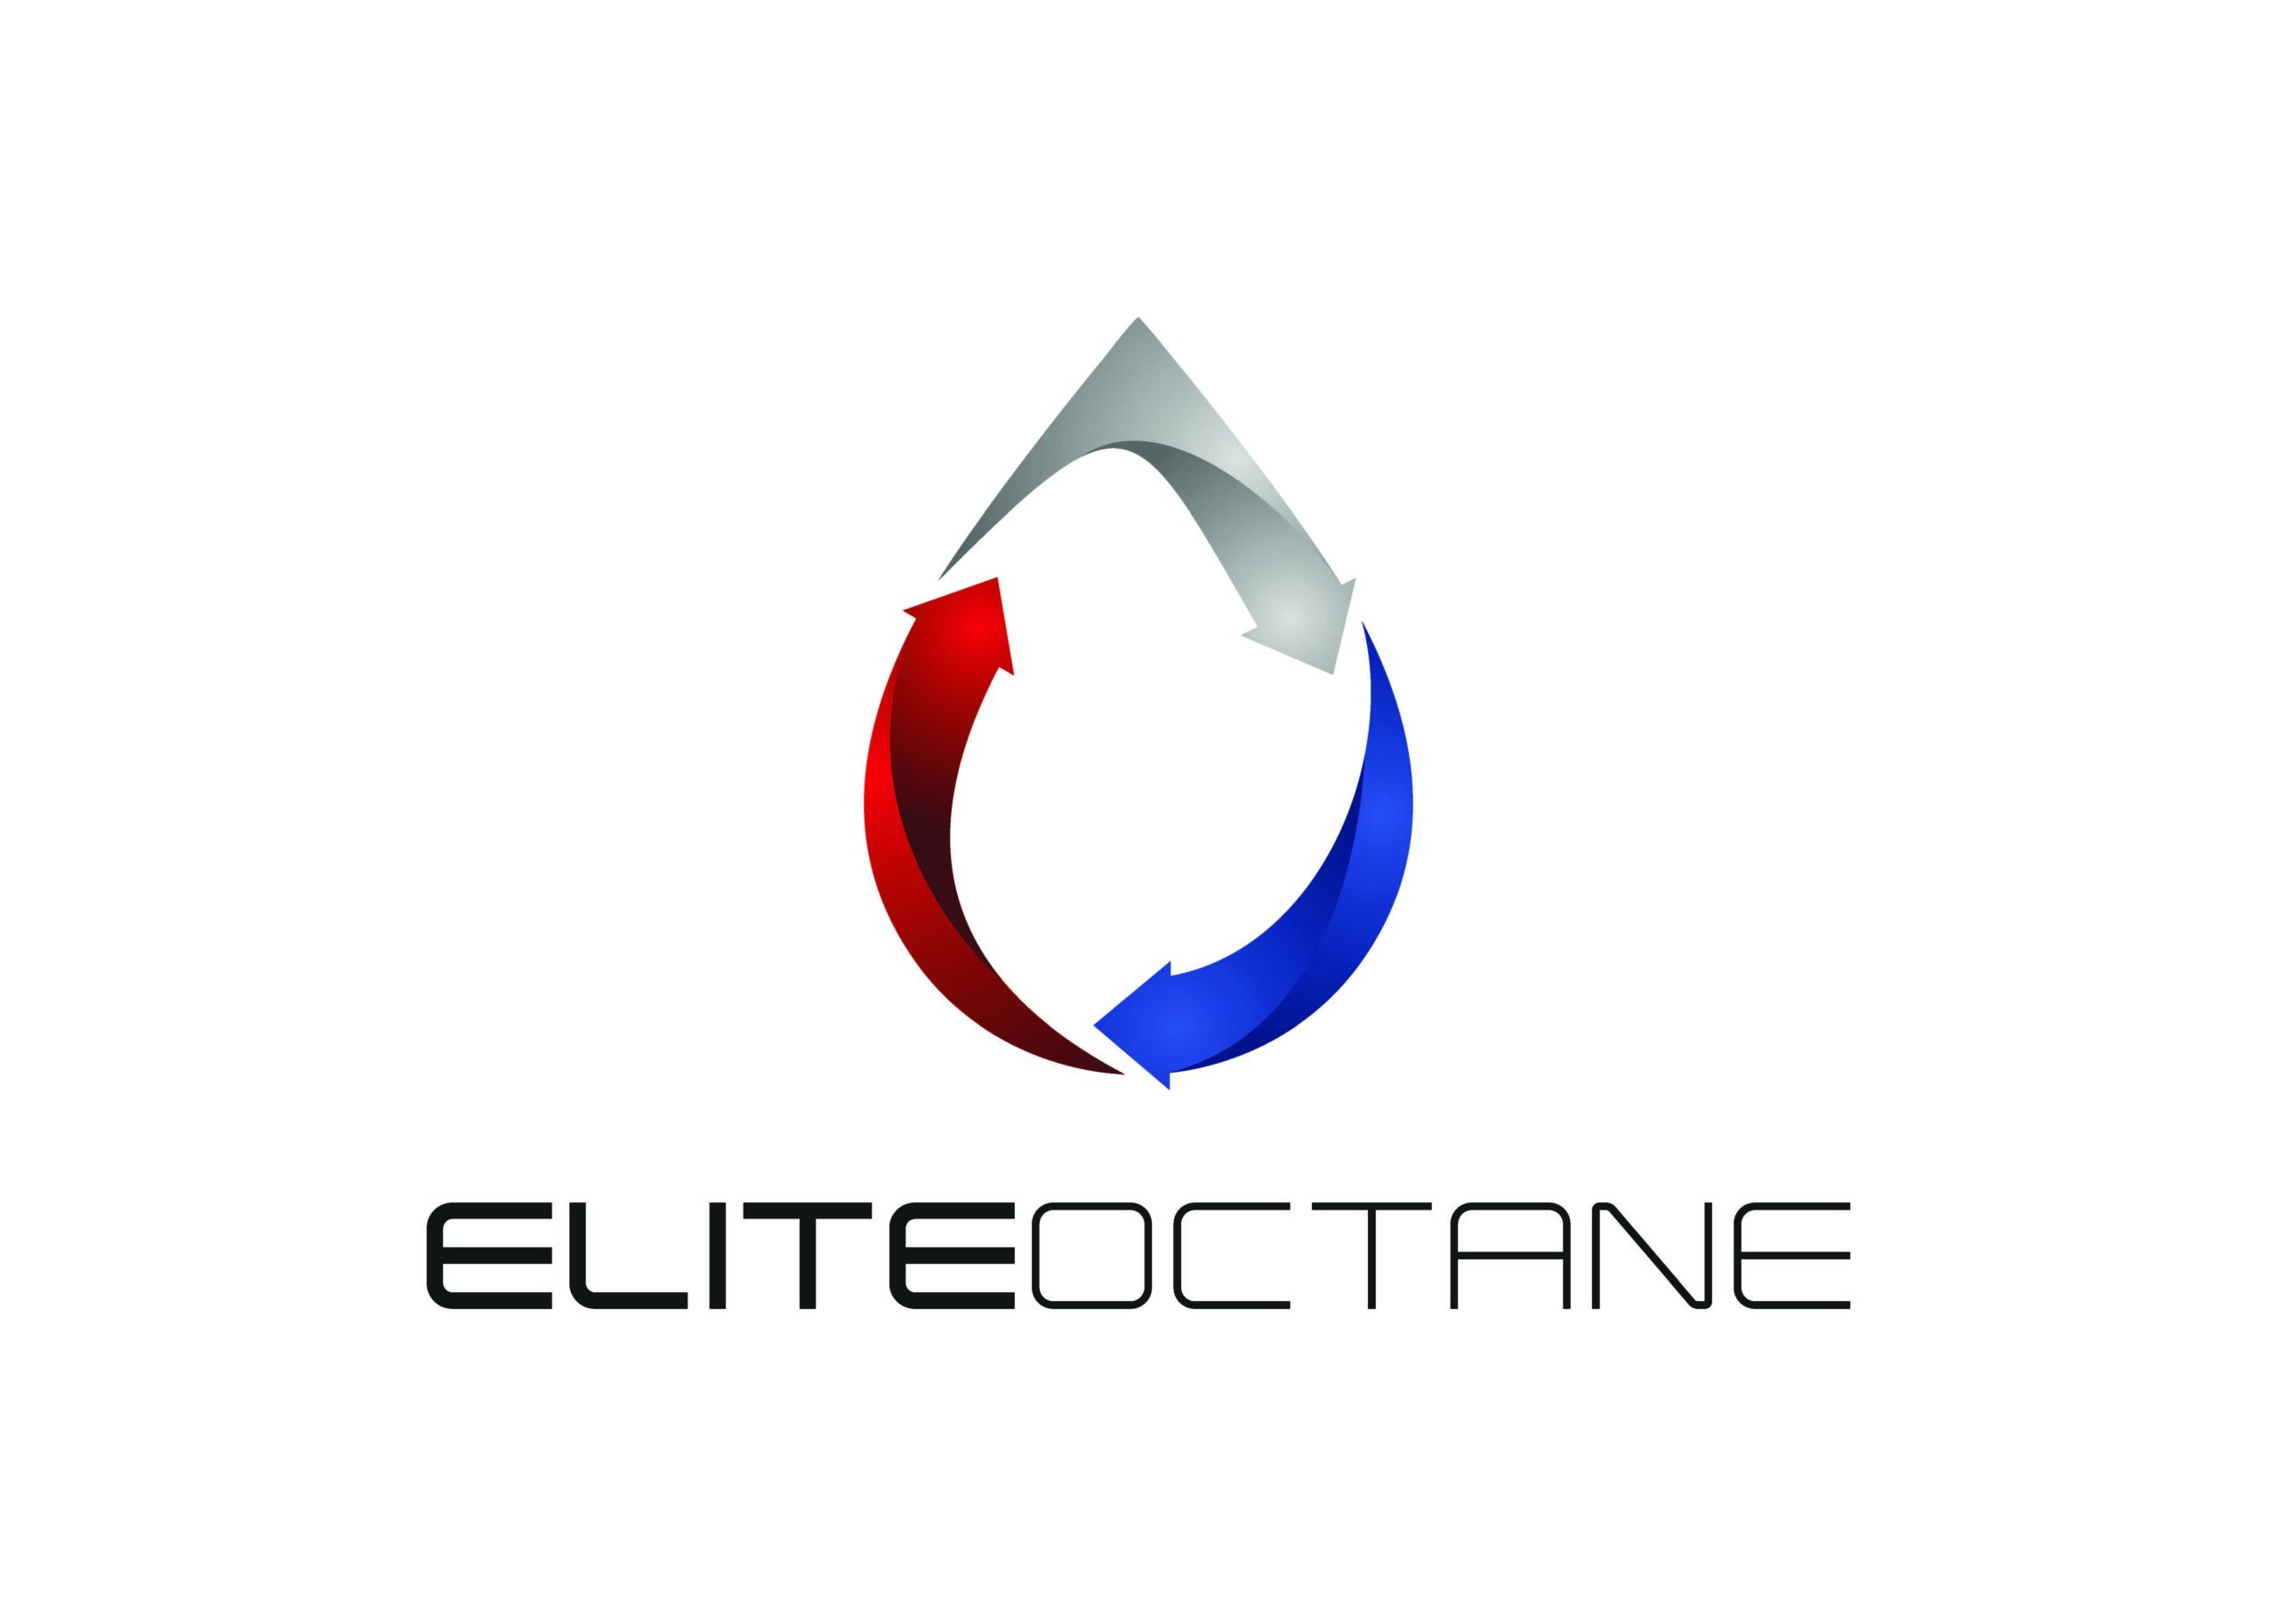 Elite Octante joined Growth Energy.